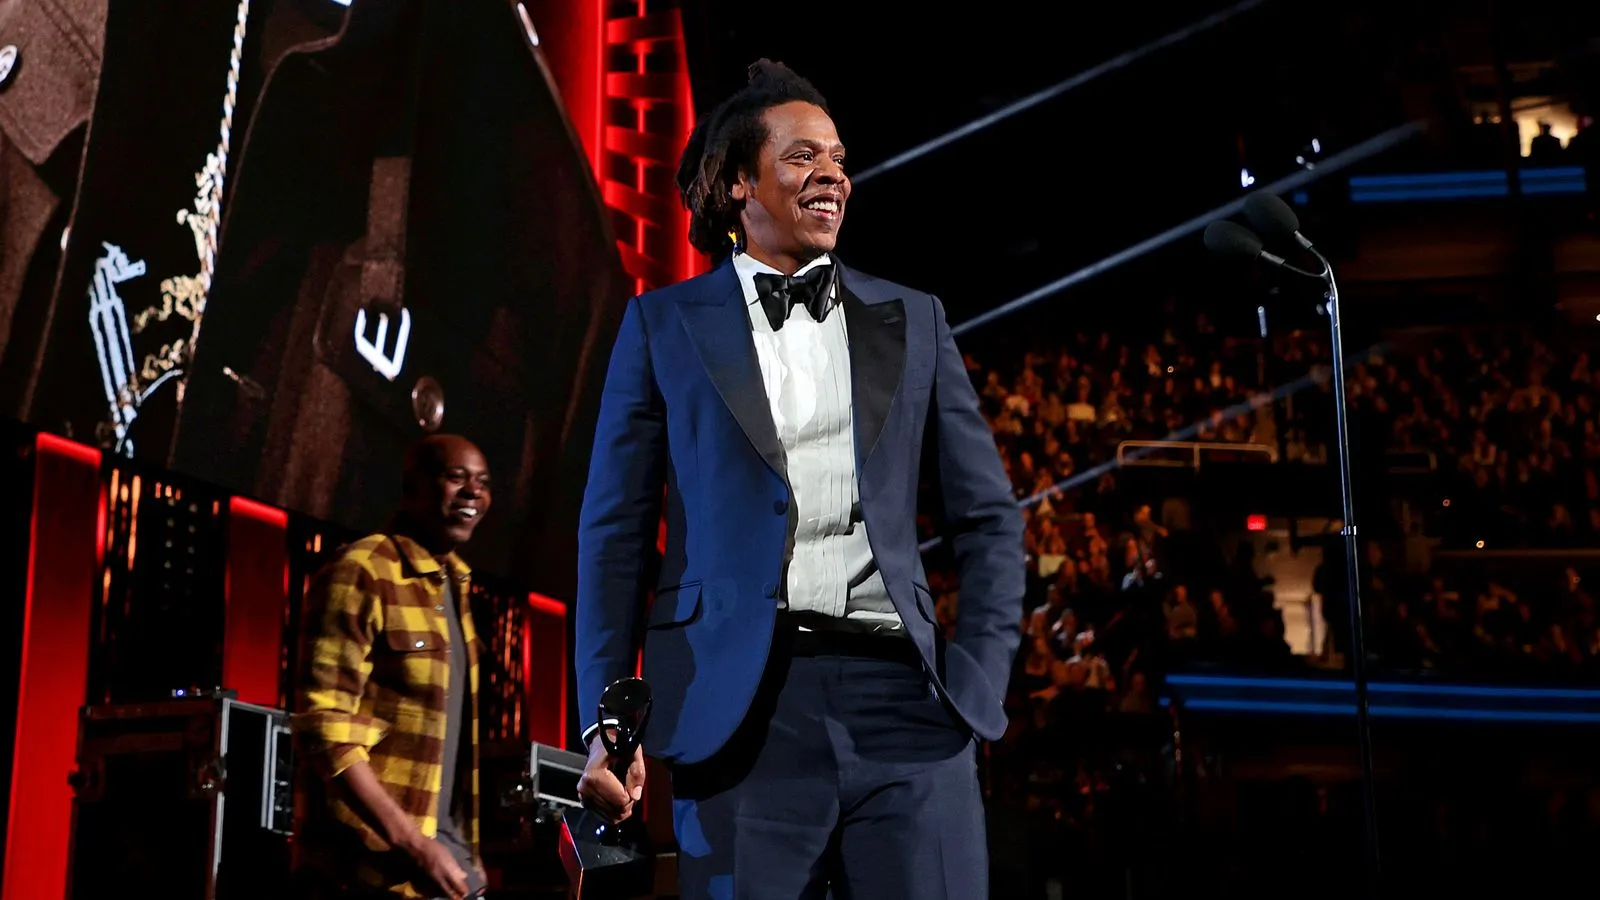 Jay-Z's New Richard Mille Watch Took Over 3,000 Hours To Build